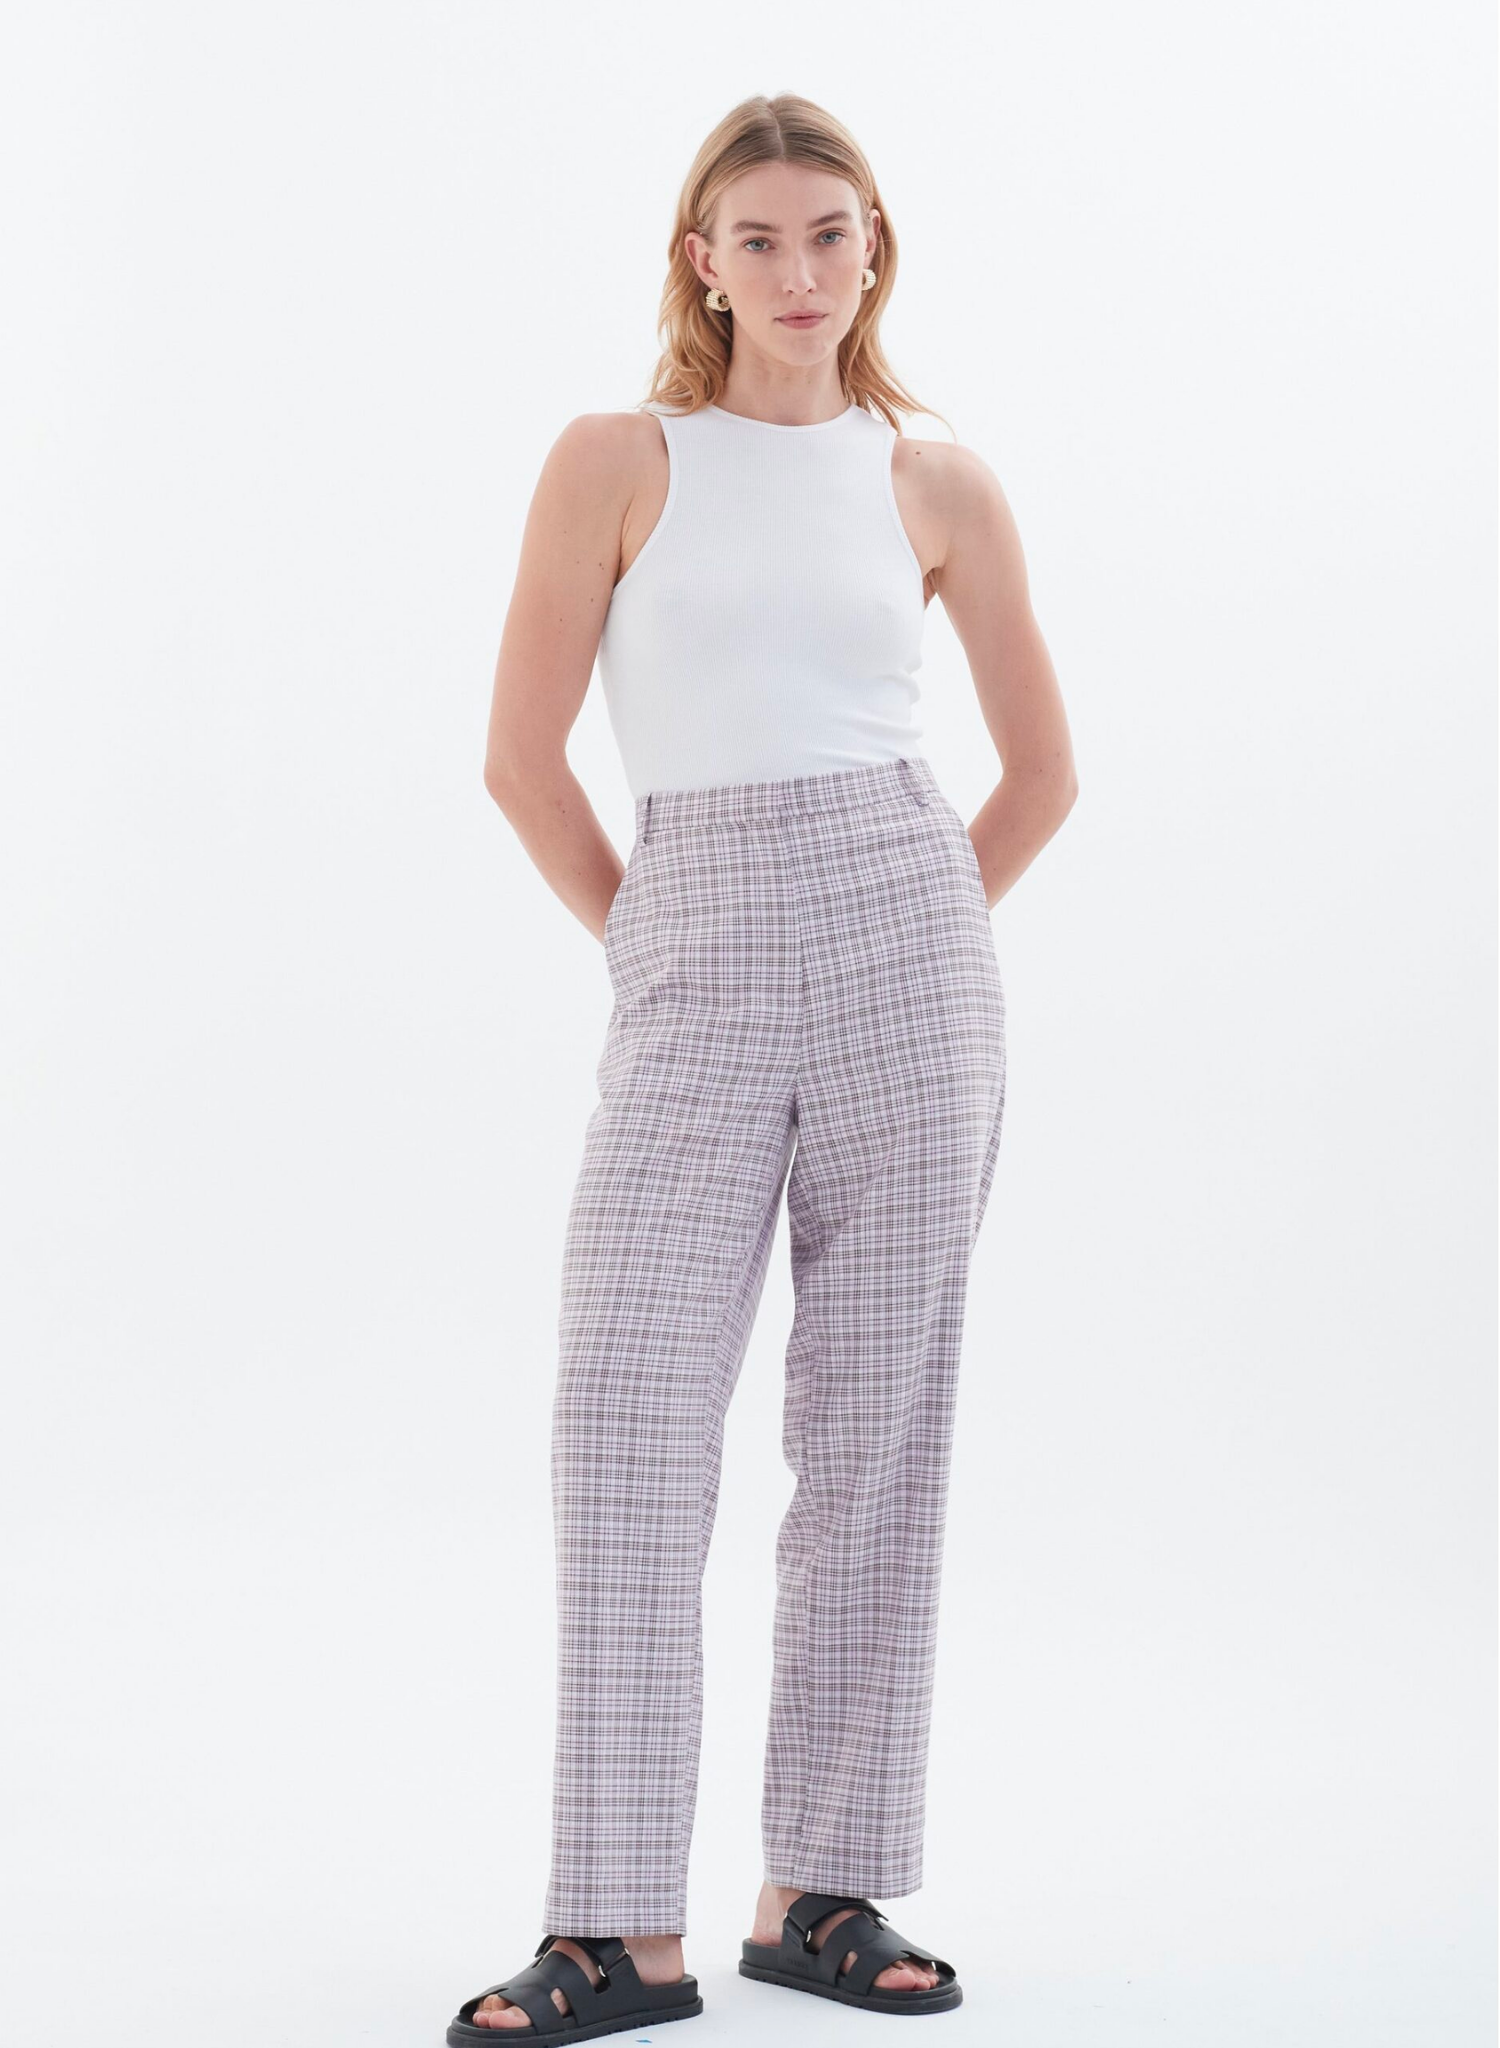 The Jamie Pants made from a cotton blend for comfort features the perfect vintage inspired check, pocket details with button closures, generous belt loops and a relaxed fit leg.